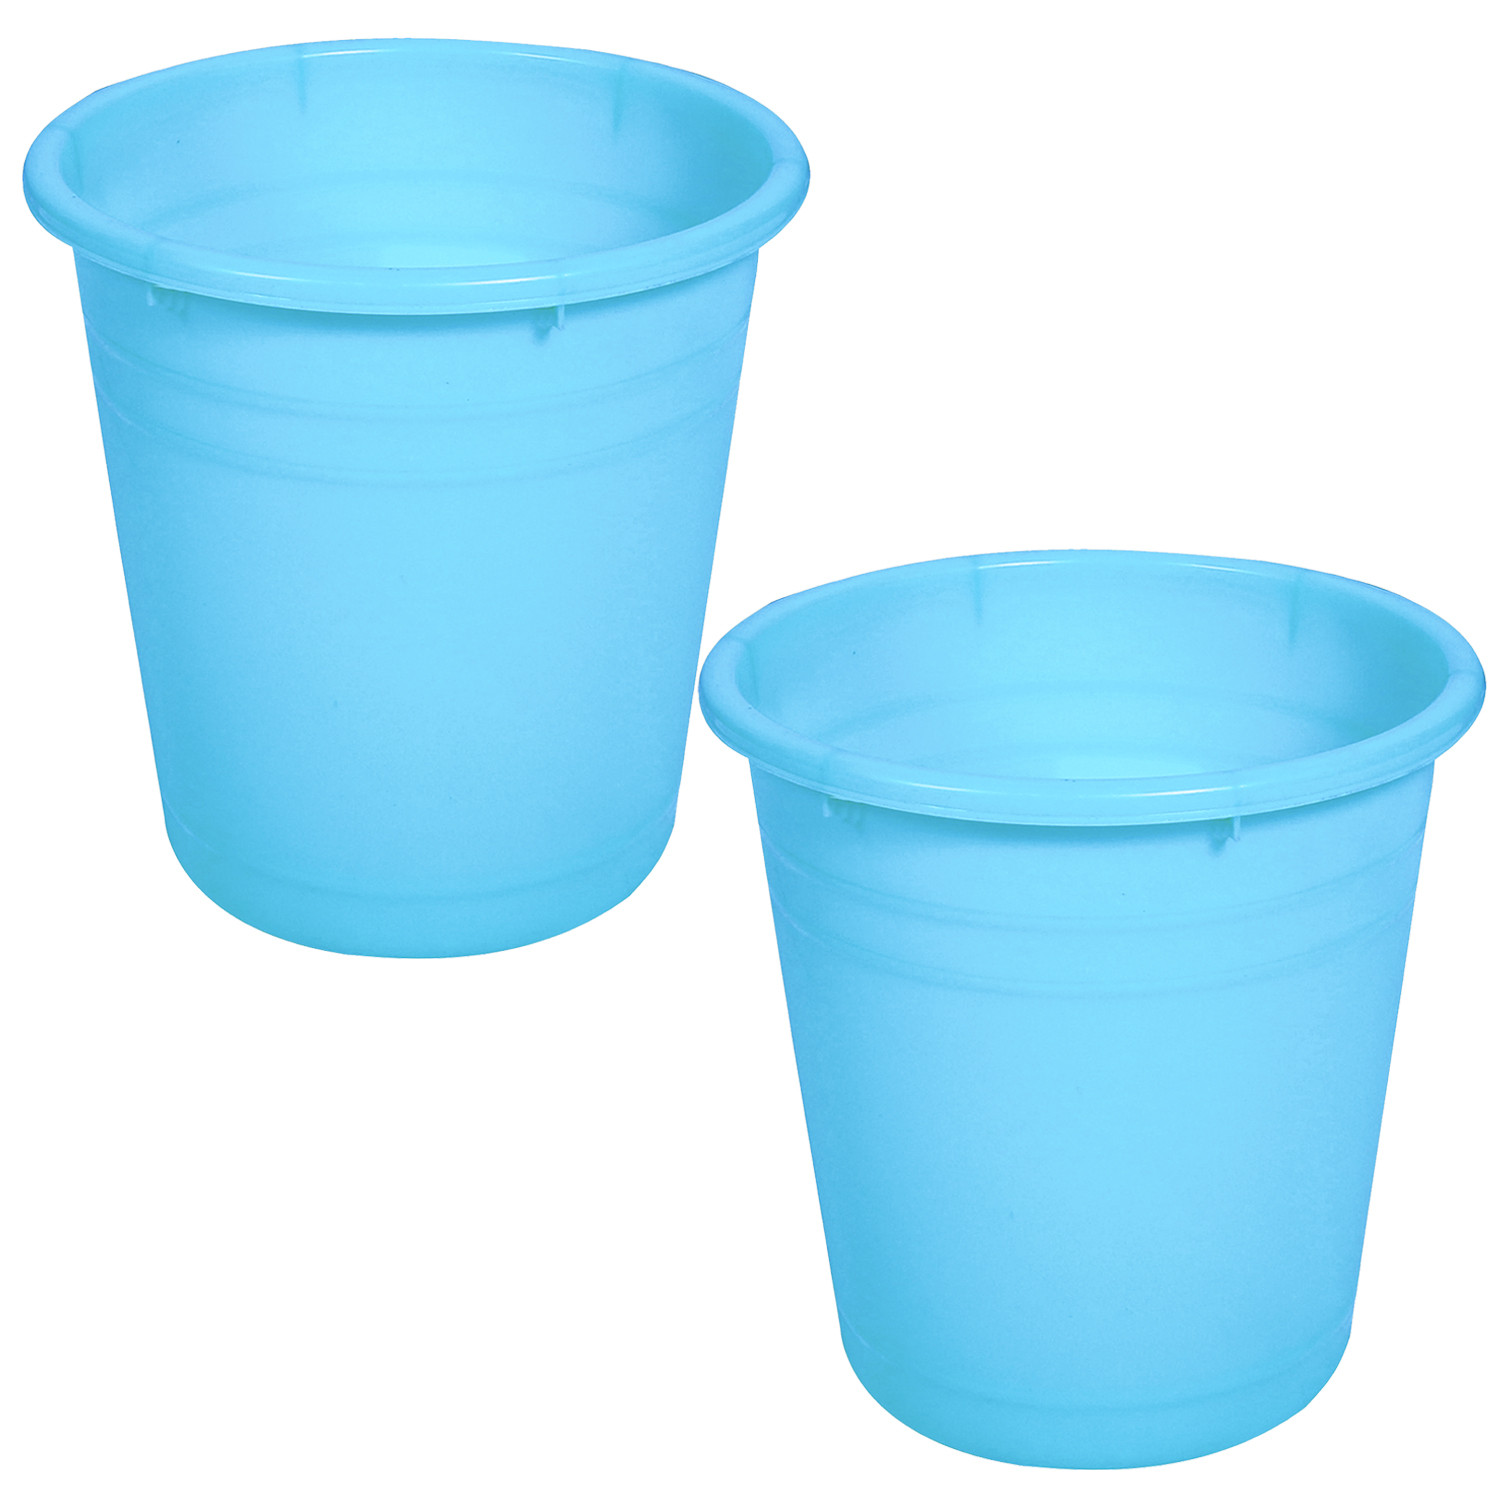 Kuber Industries Plastic Dustbin|Portable Garbage Basket & Round Trash Can for Home,Kitchen,Office,College,10 Ltr.(Sky Blue)